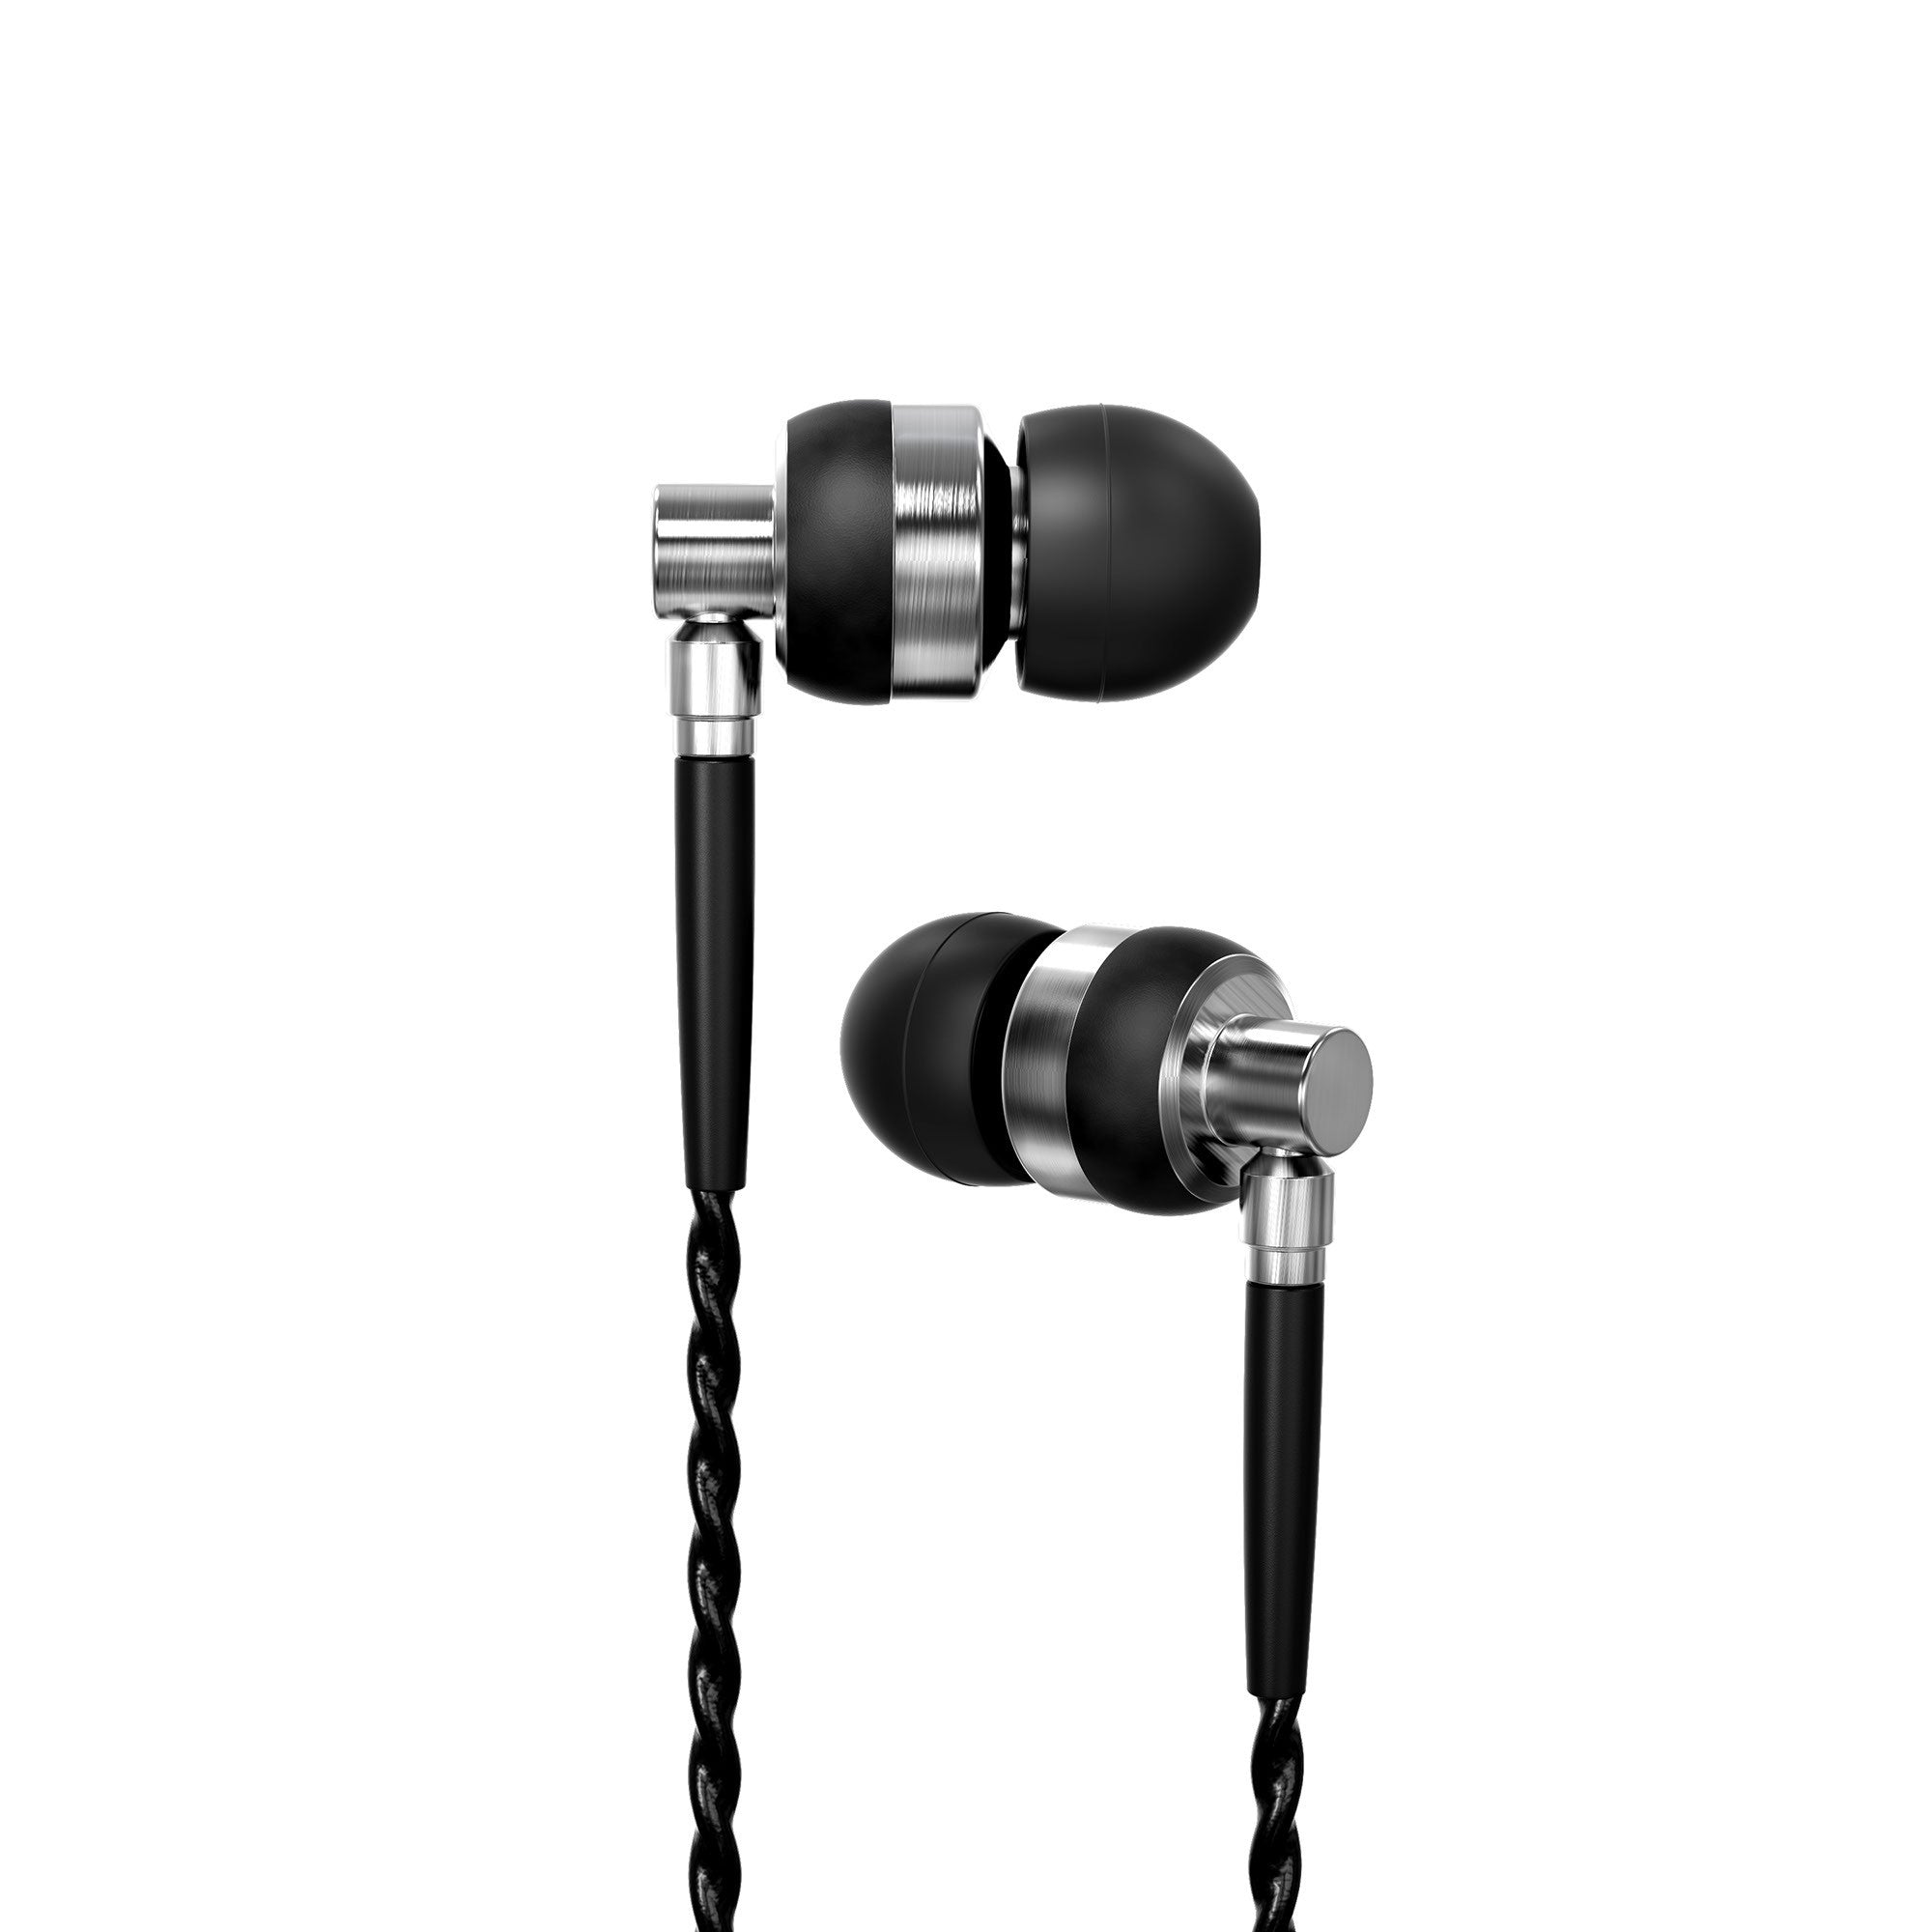 M2 Wired Earphones with Enhanced Bass & Clarity